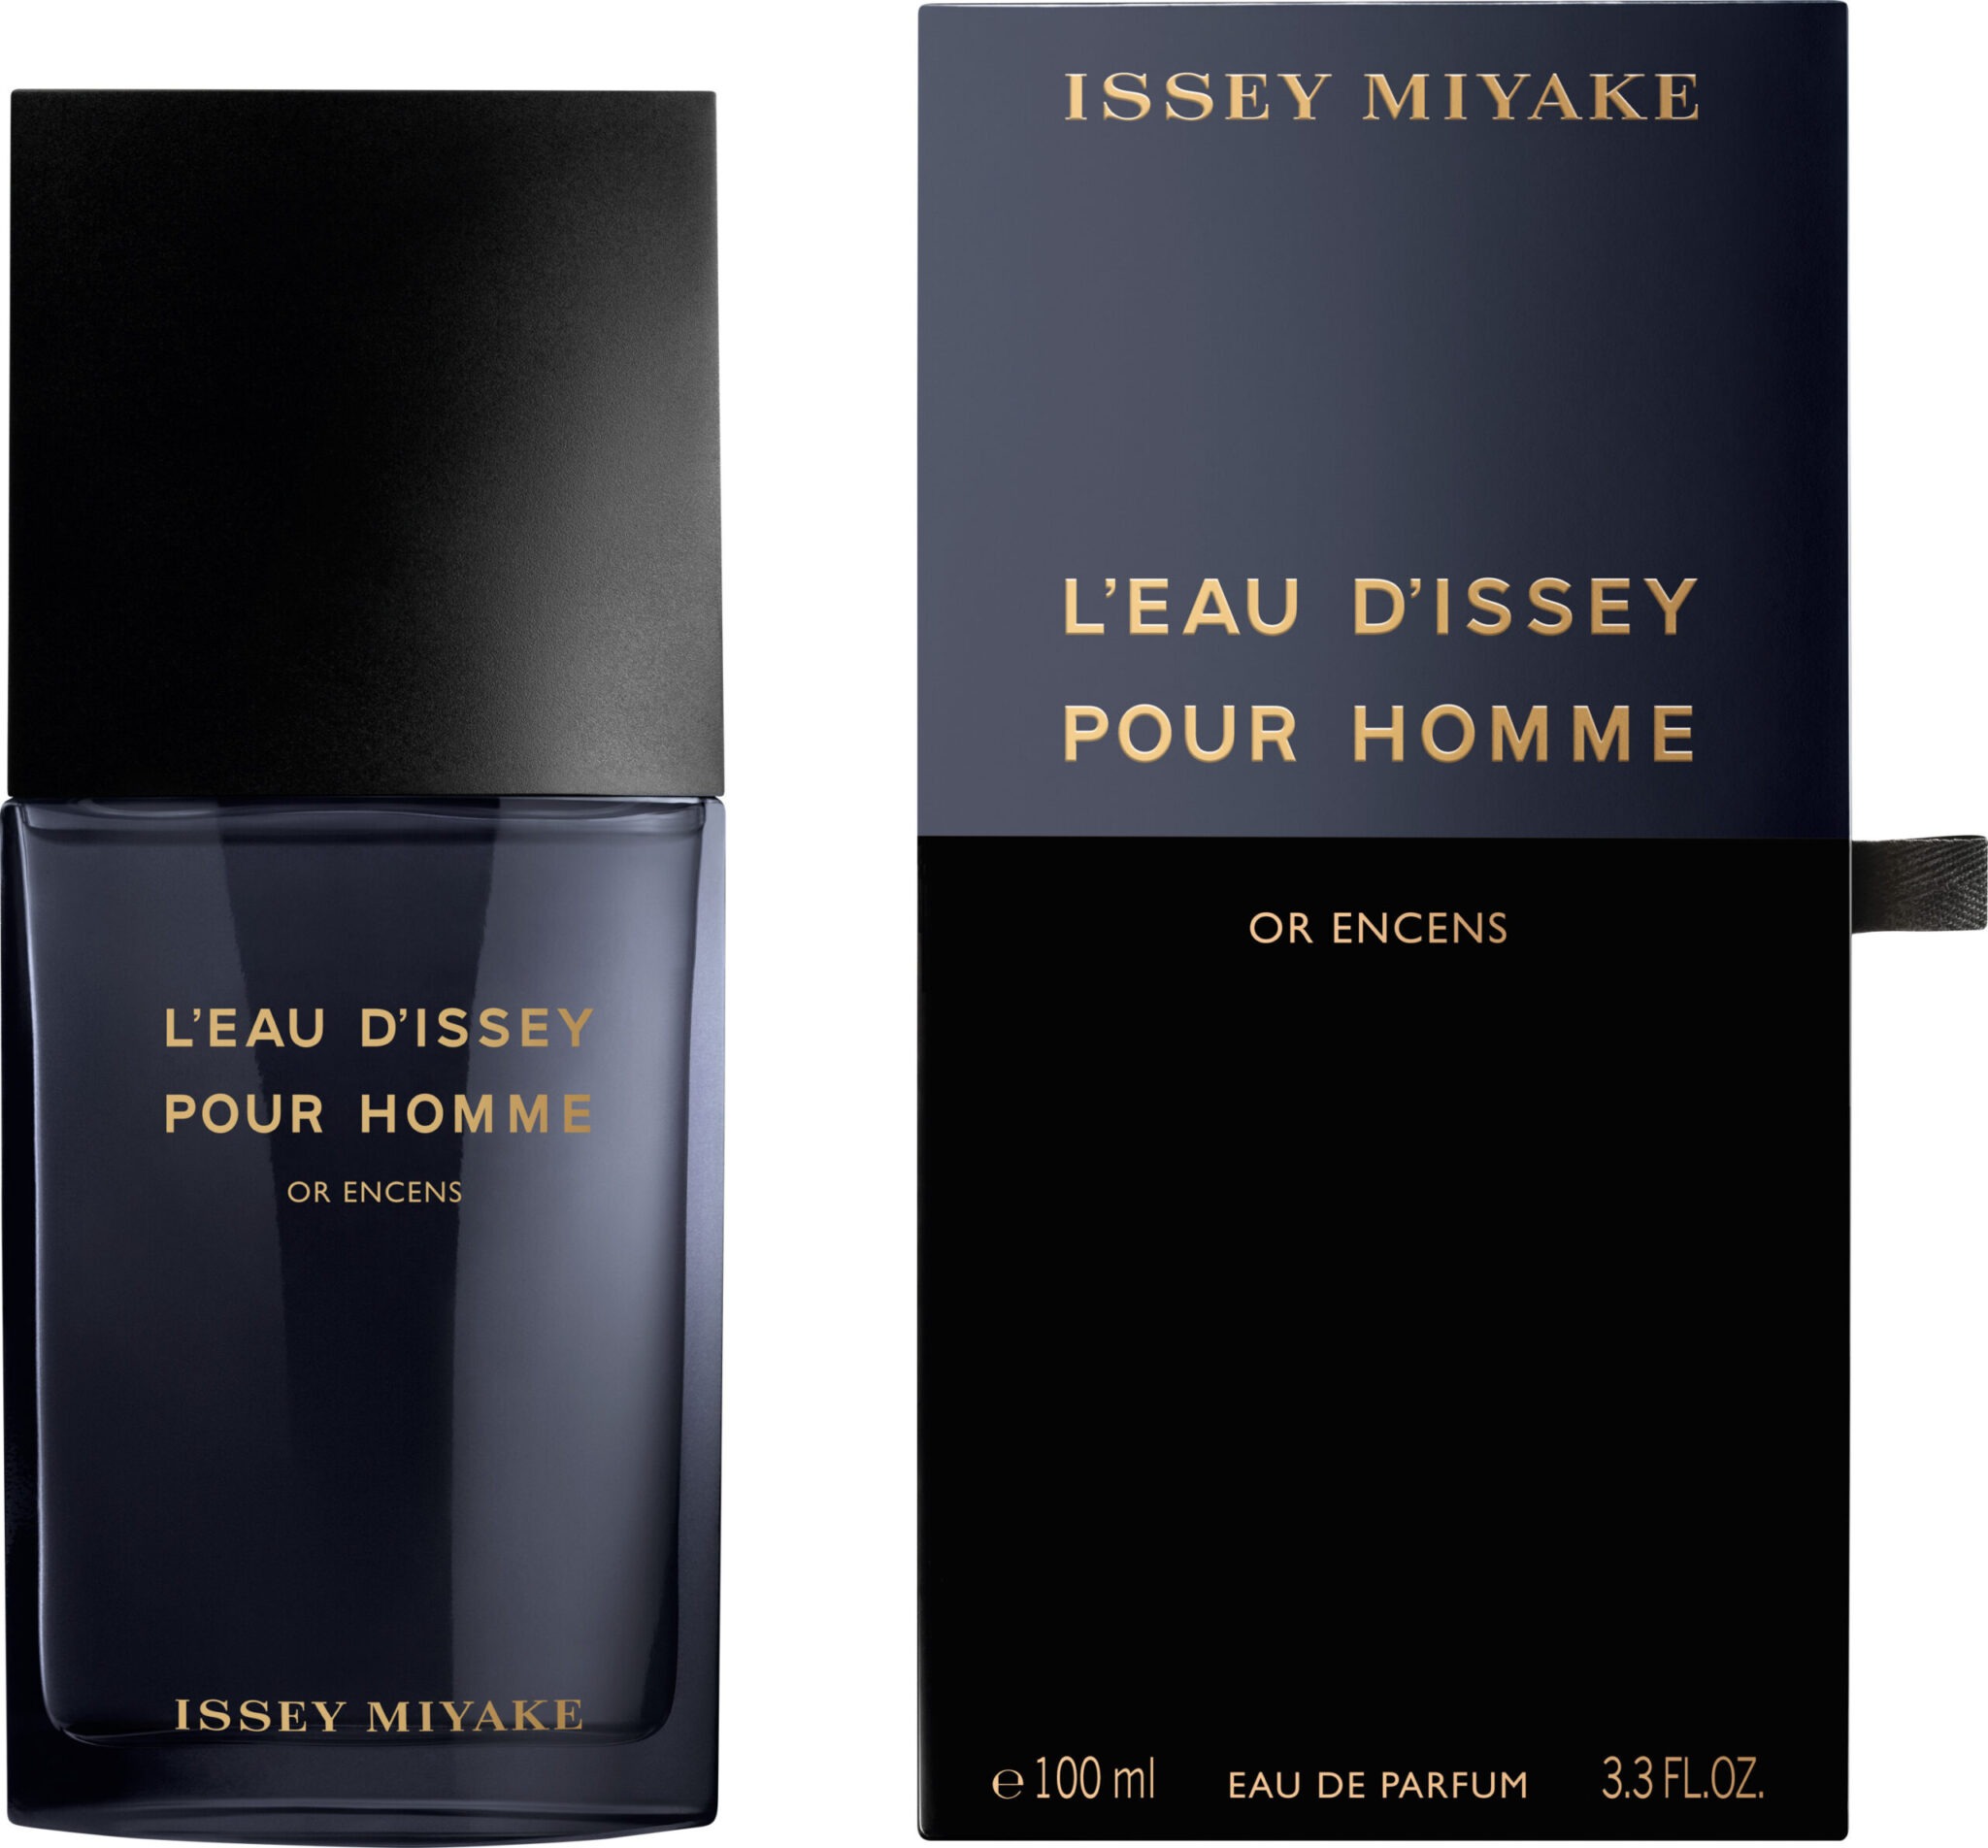 ISSEY MIYAKE L’EAU D’ISSEY OR ENCENS EDP 100 ML FOR MEN - Perfume